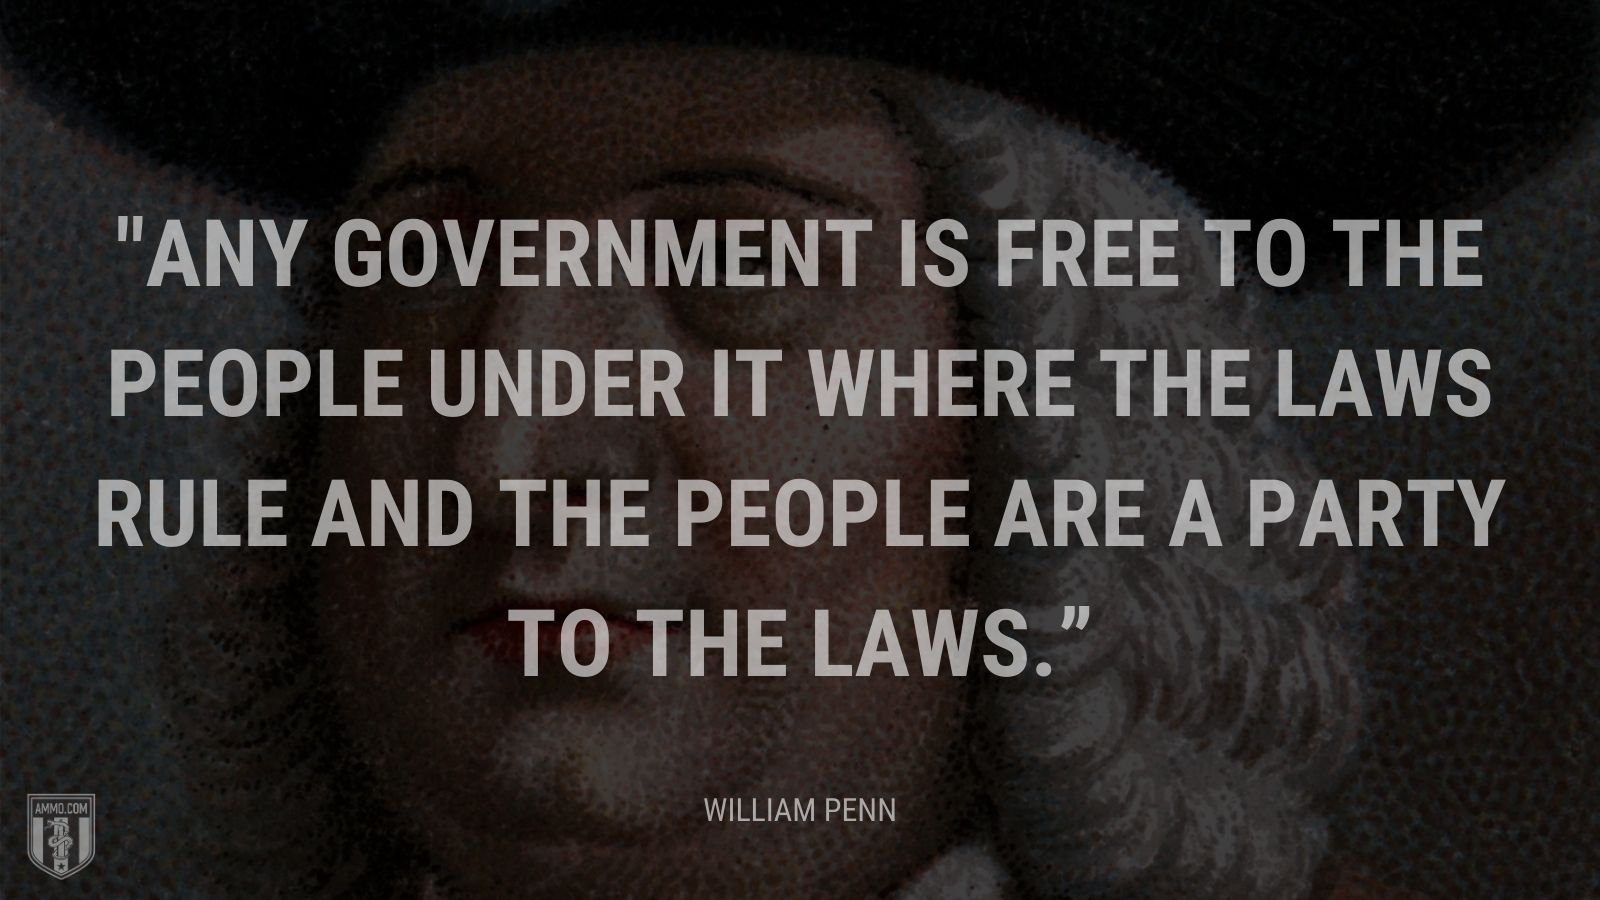 “Any government is free to the people under it where the laws rule and the people are a party to the laws.” - William Penn